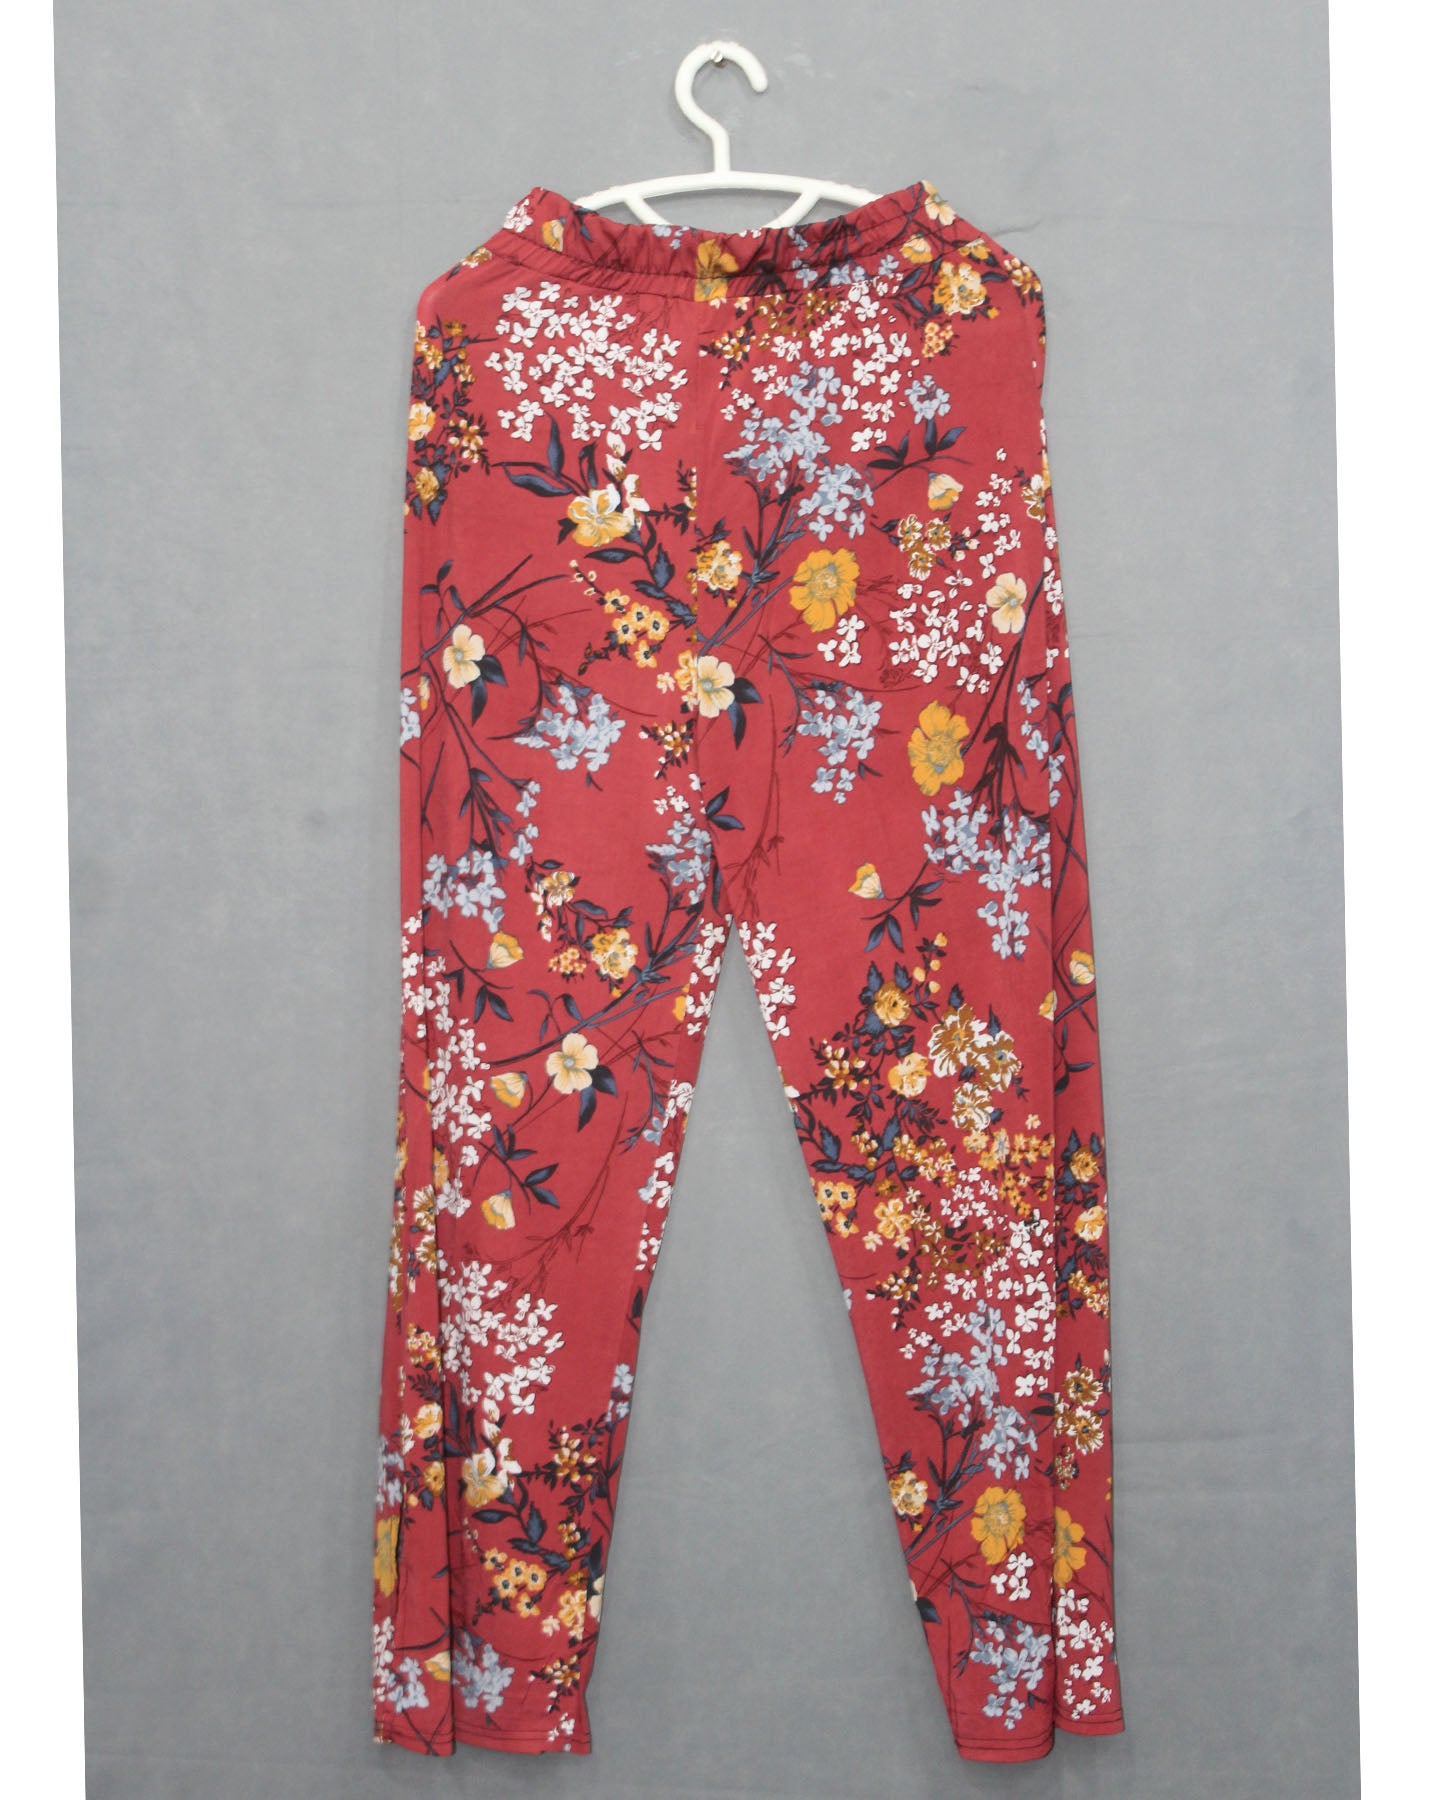 Lildy Branded Original Rayon Trouser For Women